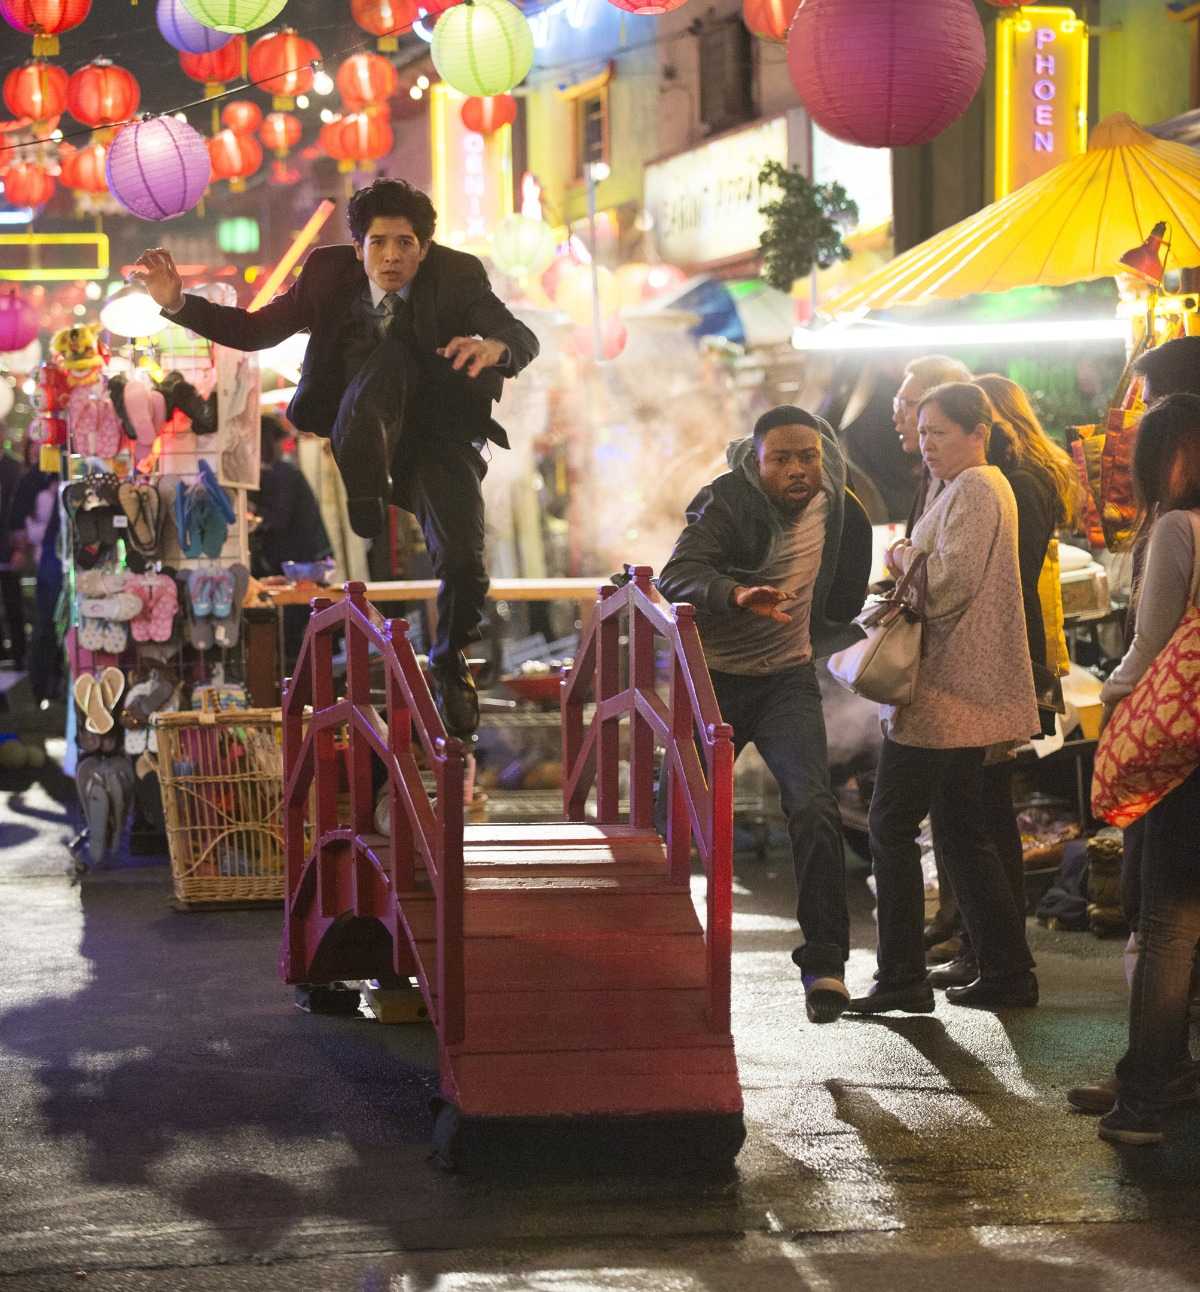 'Rush Hour' TV Series: Reasons Why It's unwelcome Compared to The Movie